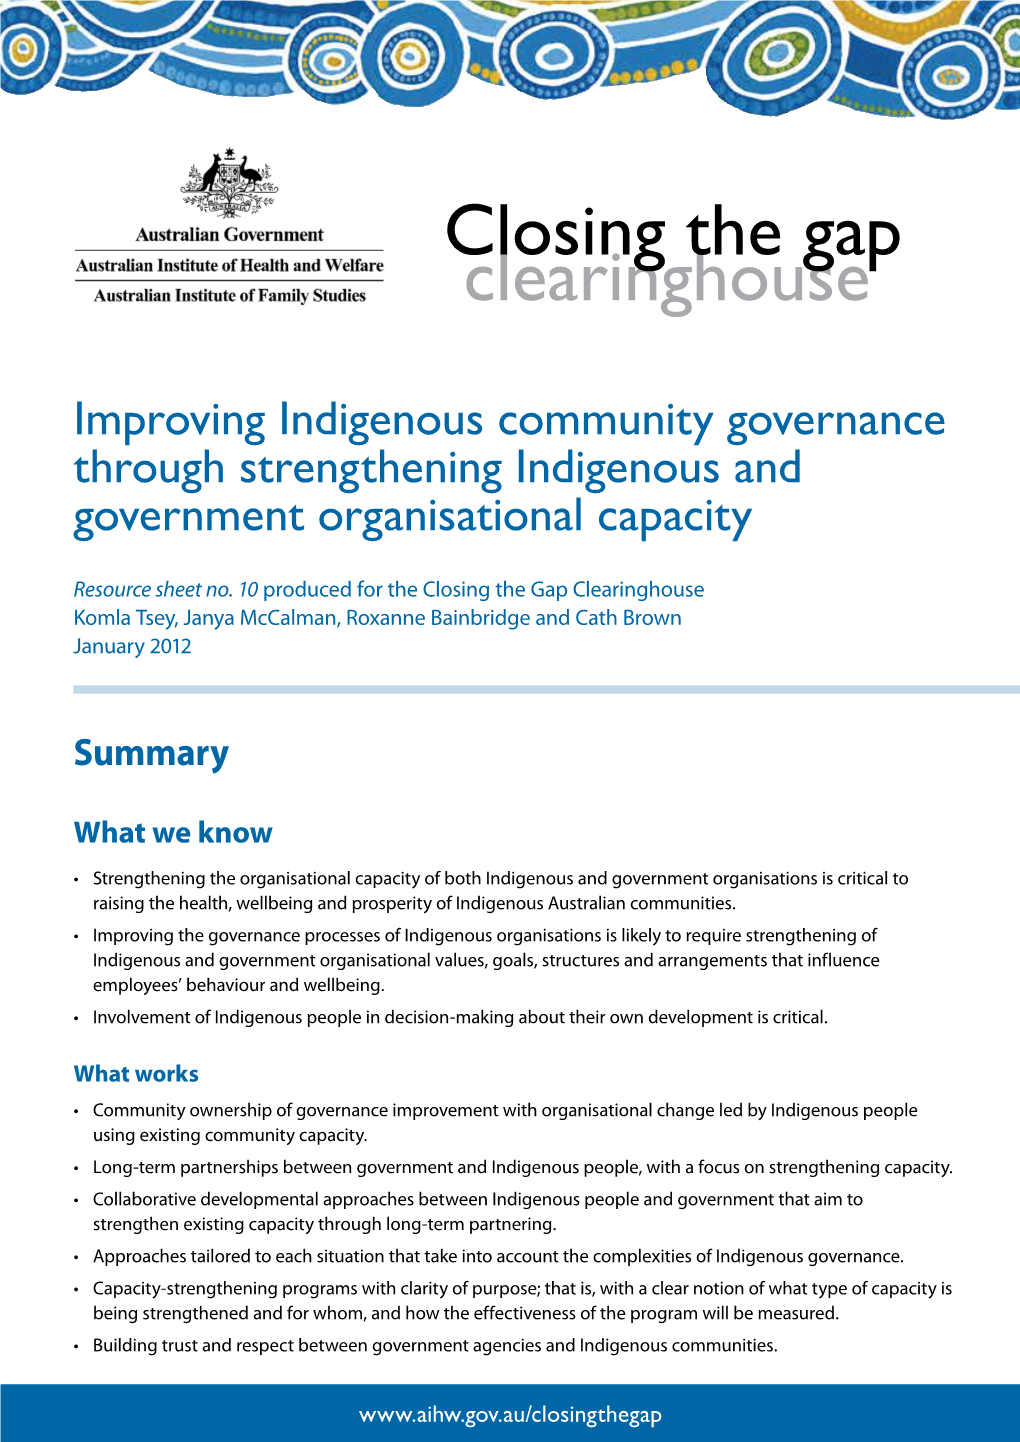 Improving Indigenous Community Governance Through Strengthening Indigenous and Government Organisational Capacity